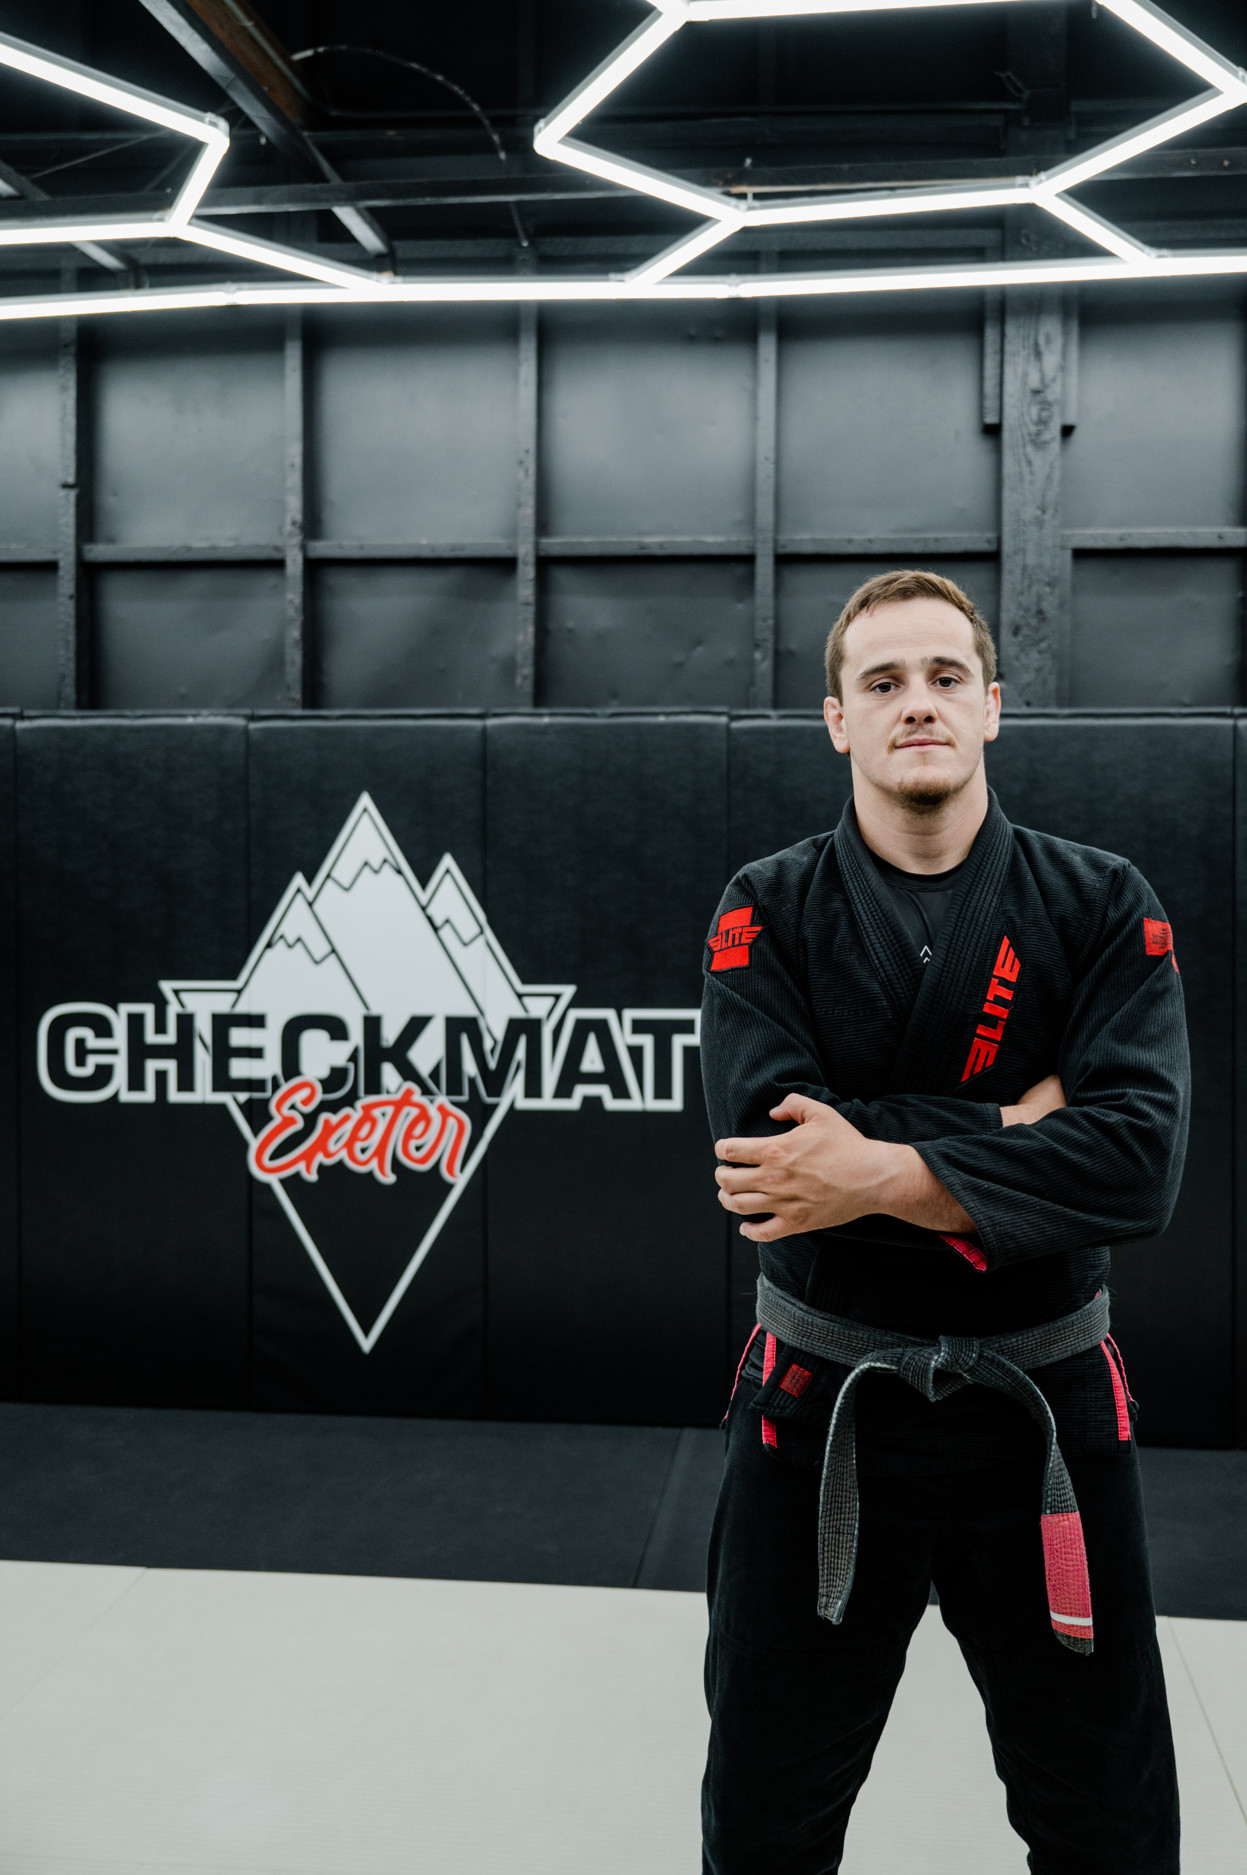 Checkmat Exeter 